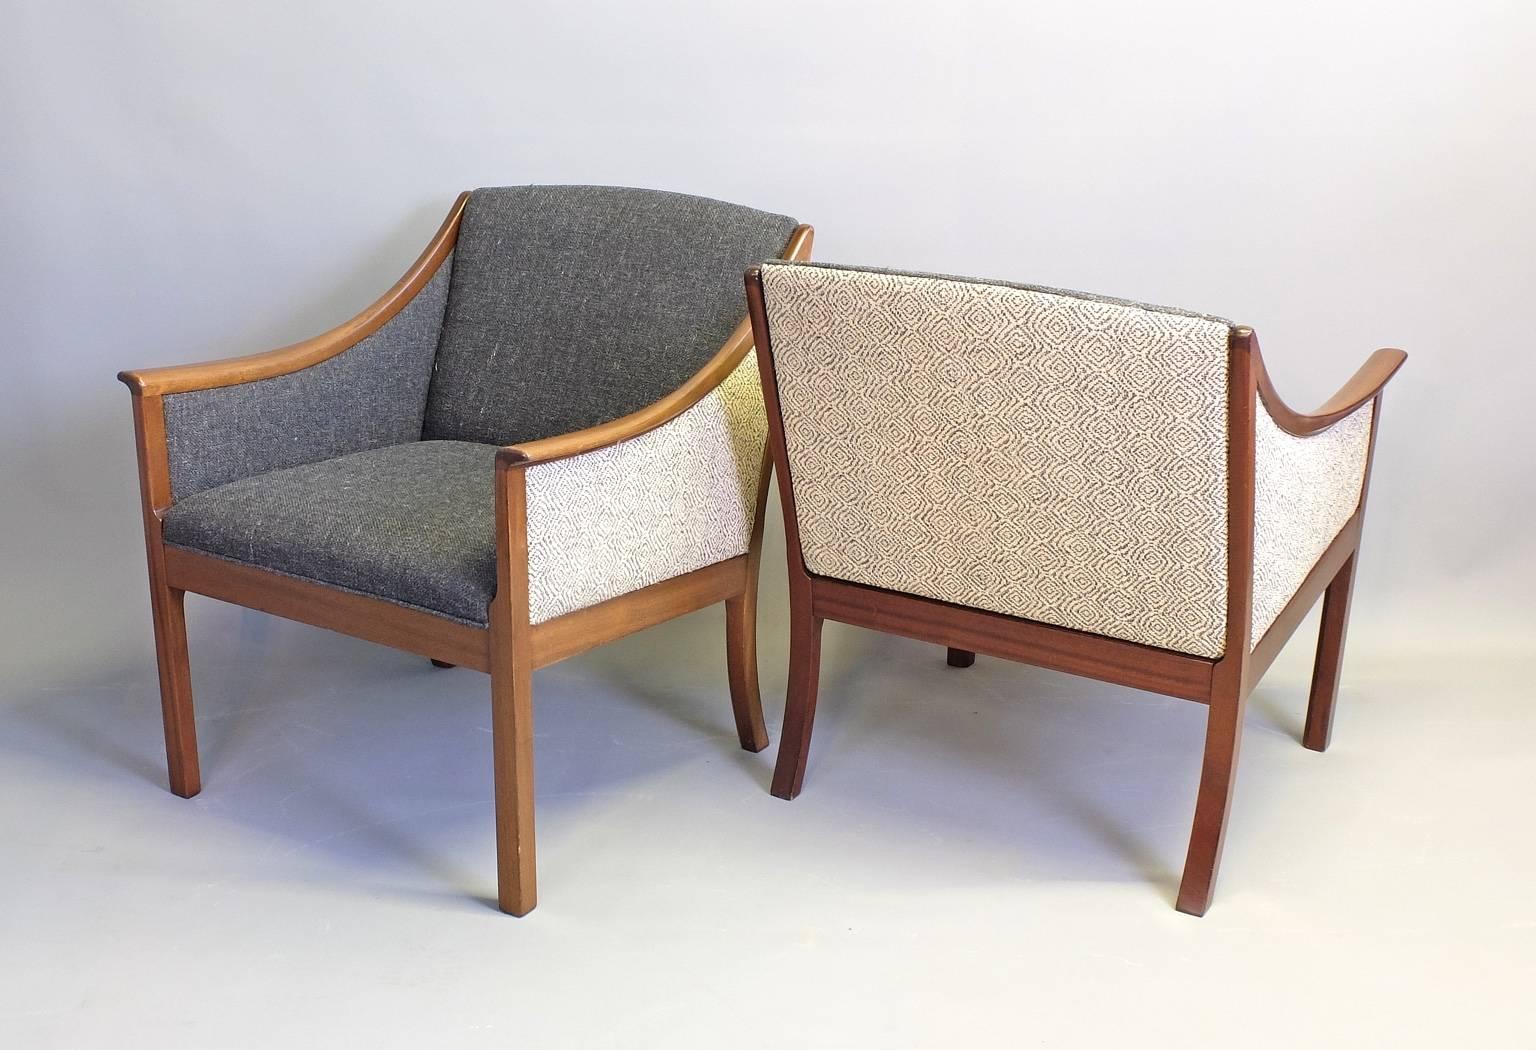 Scandinavian Modern Ole Wanscher for Poul Jeppesen Mahogany Sofa and Pair of Lounge Chairs, 1950s